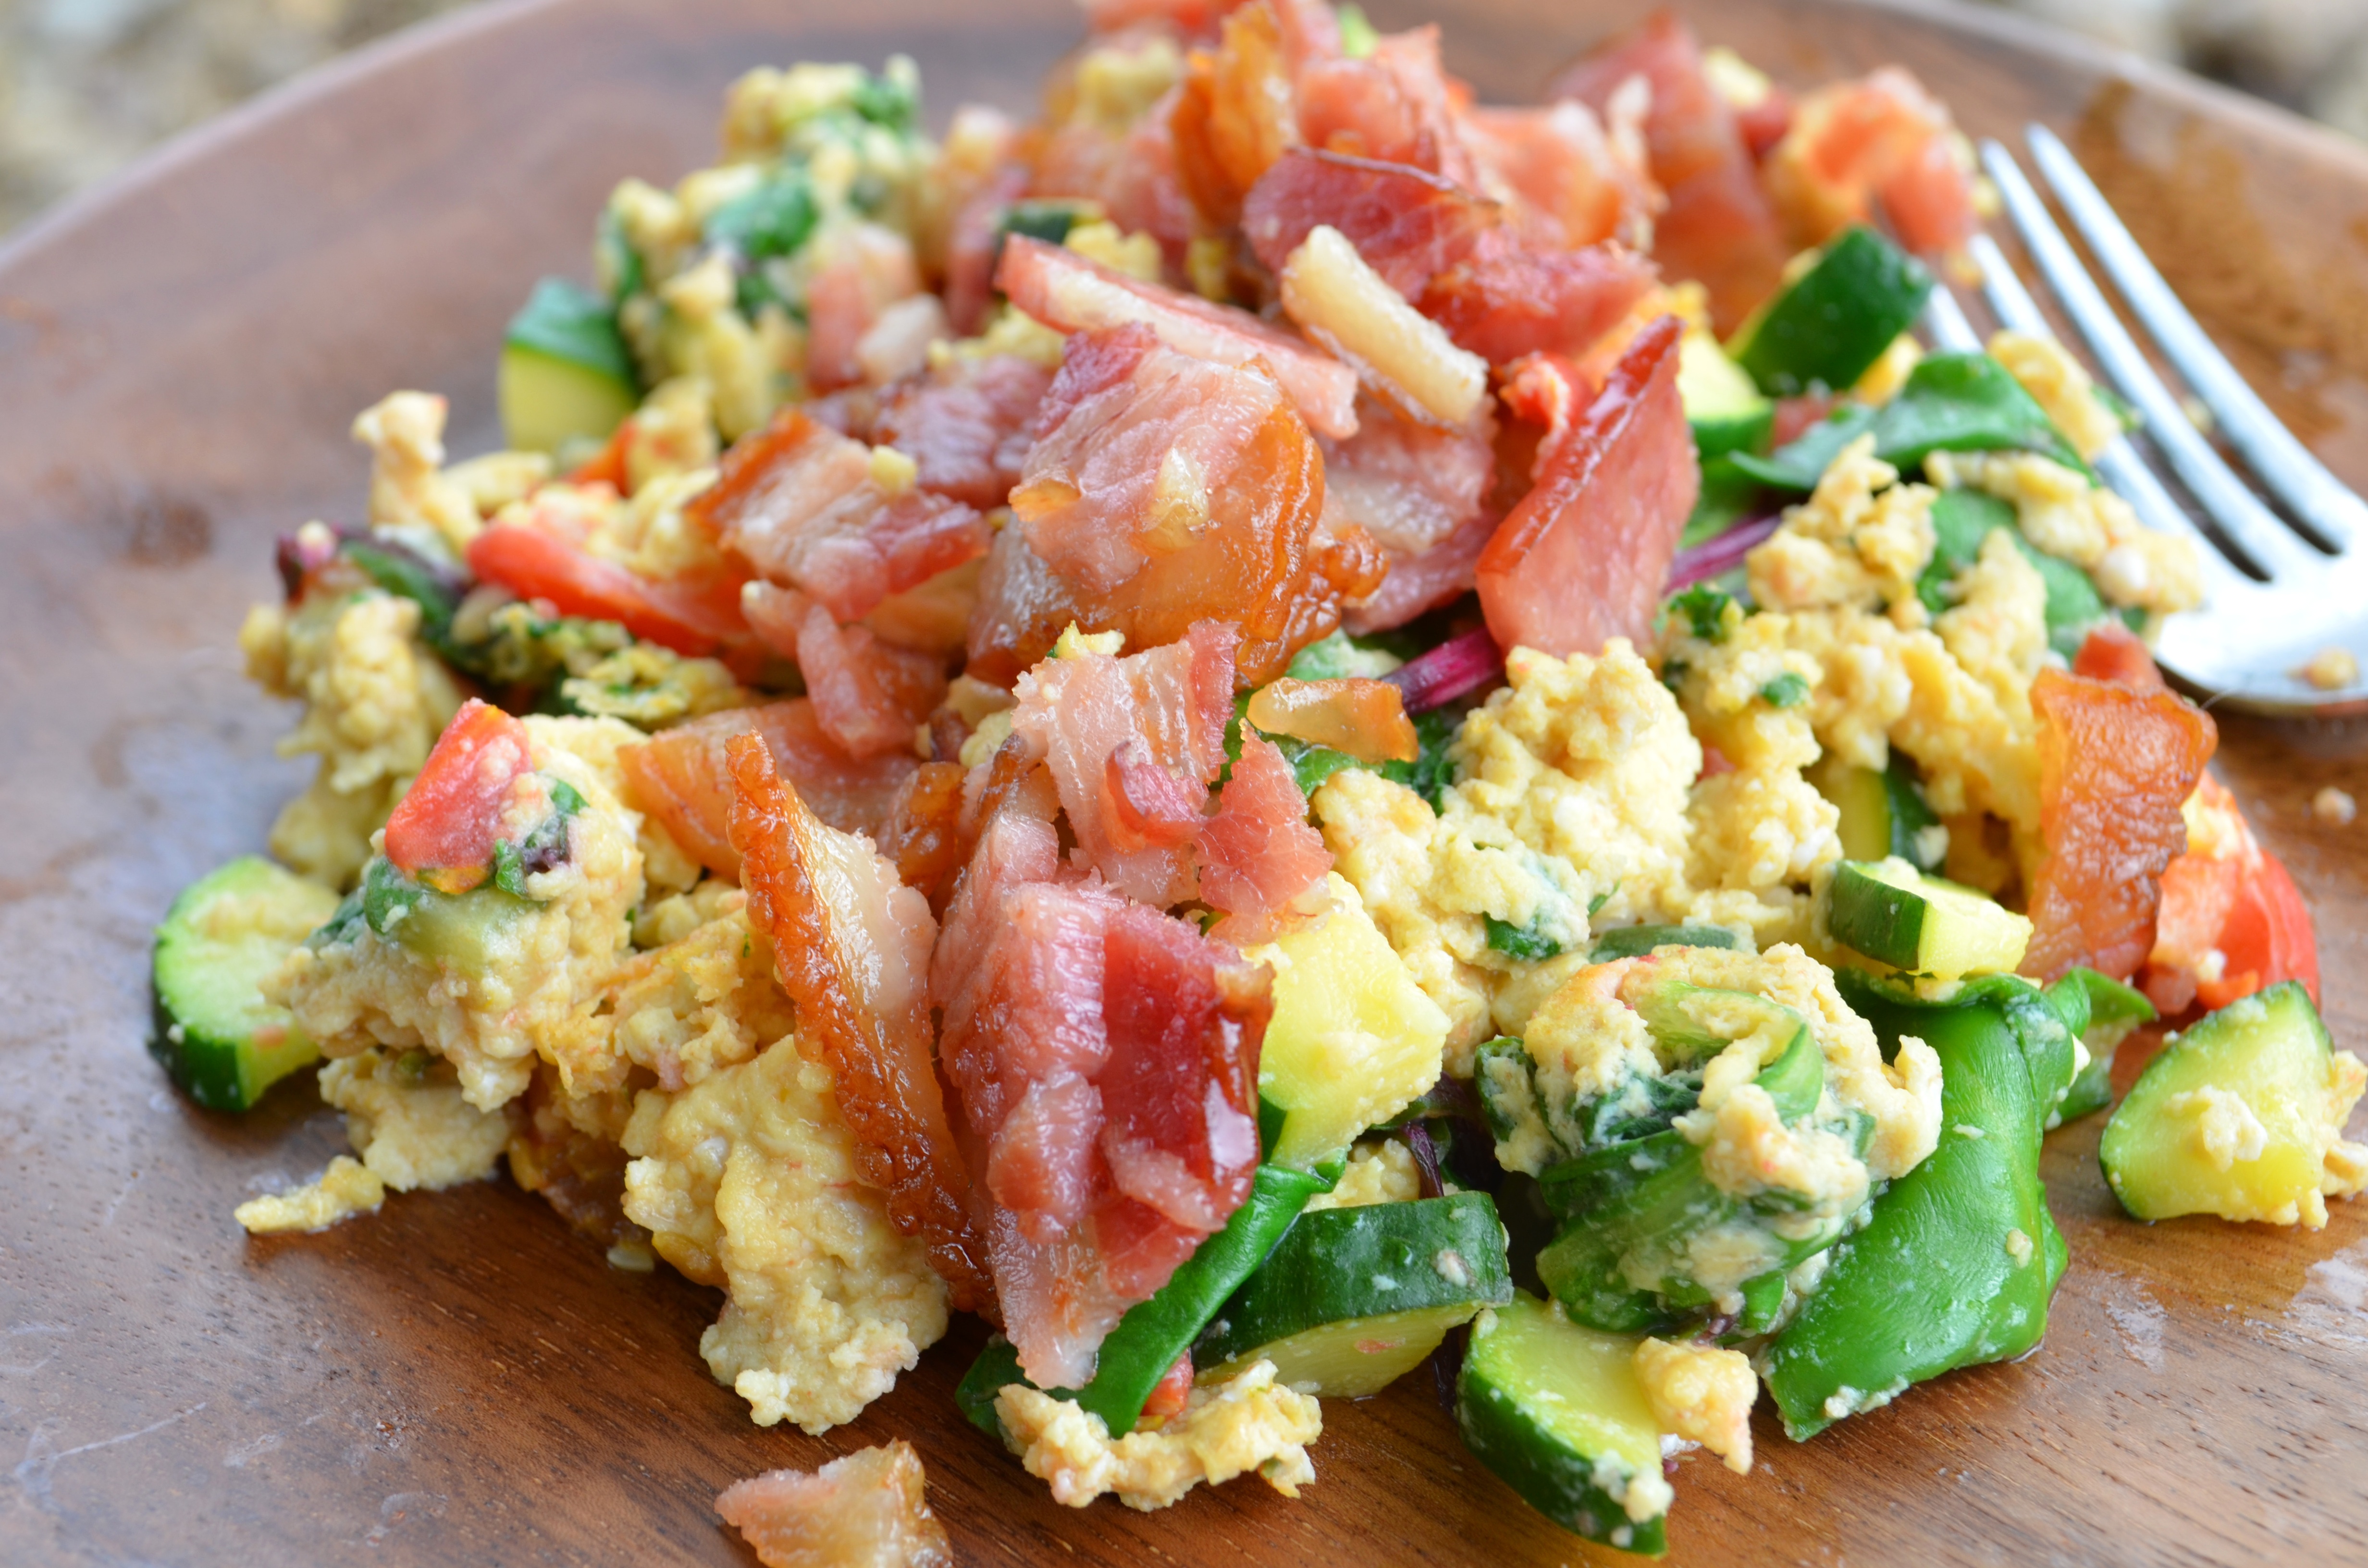 Scrambled Eggs with Bacon and Vegetables Recipe - Paleo Plan